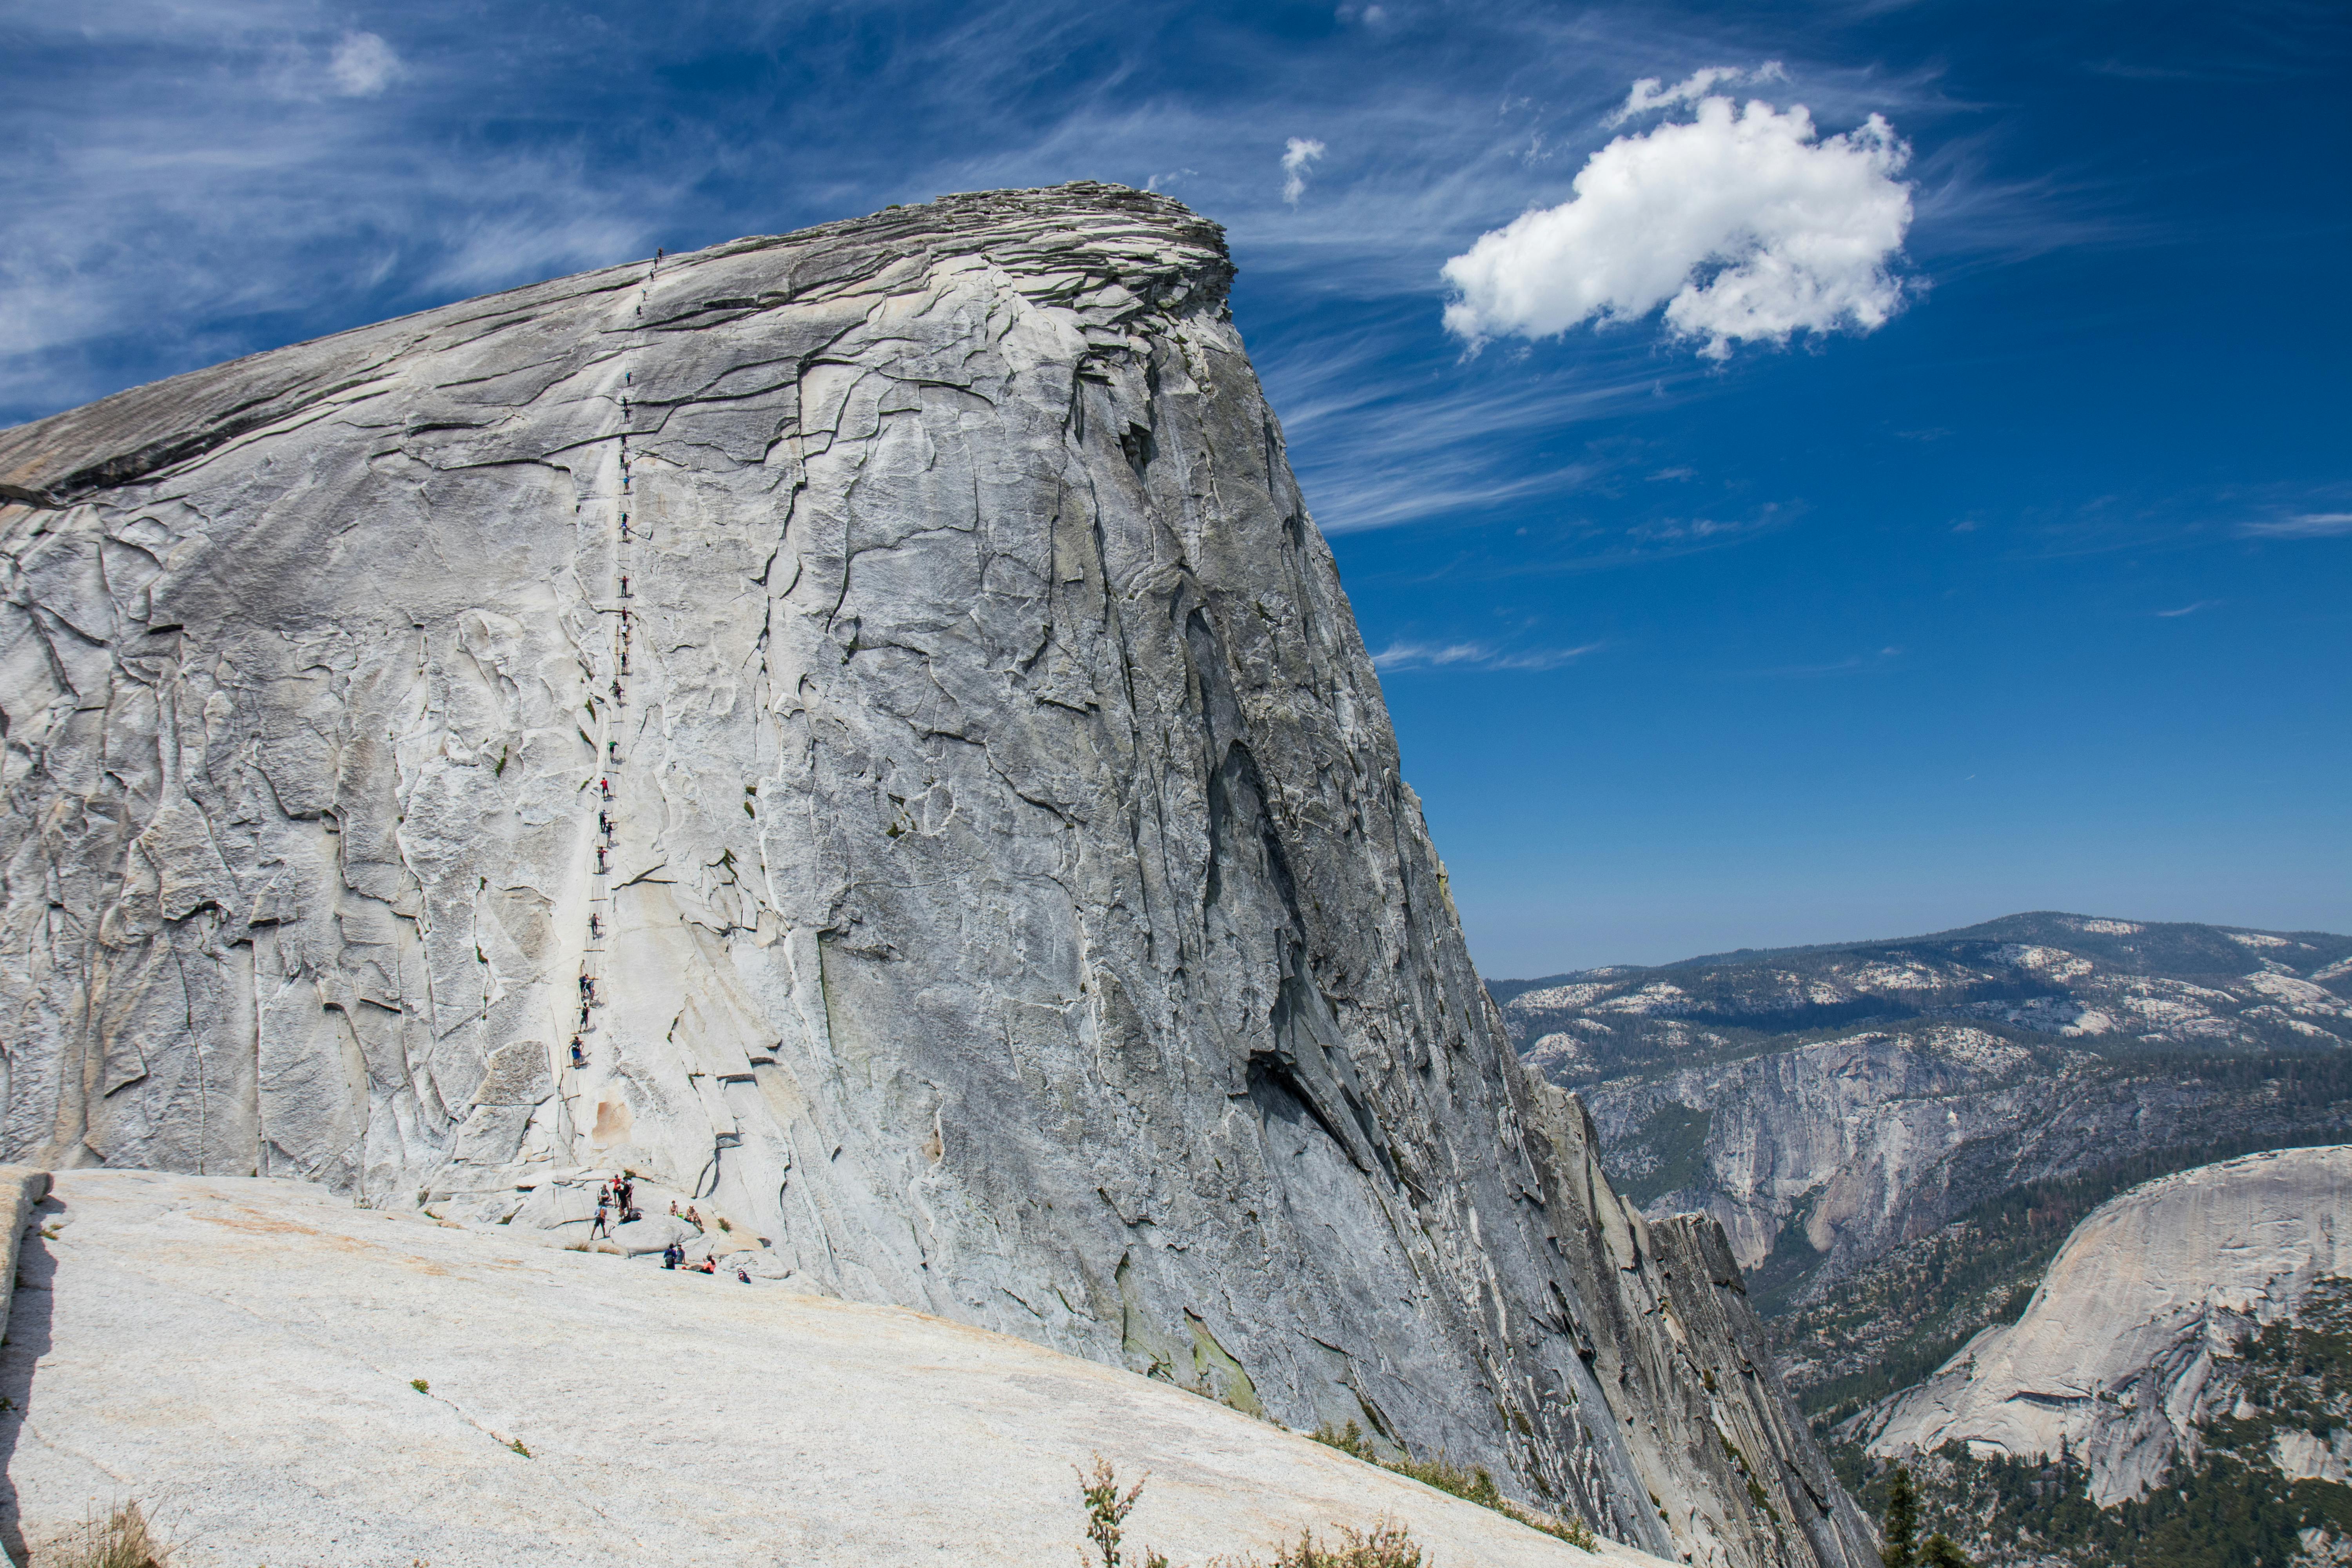 A line of hikers making their way up Half Dome in Yosemite National Park